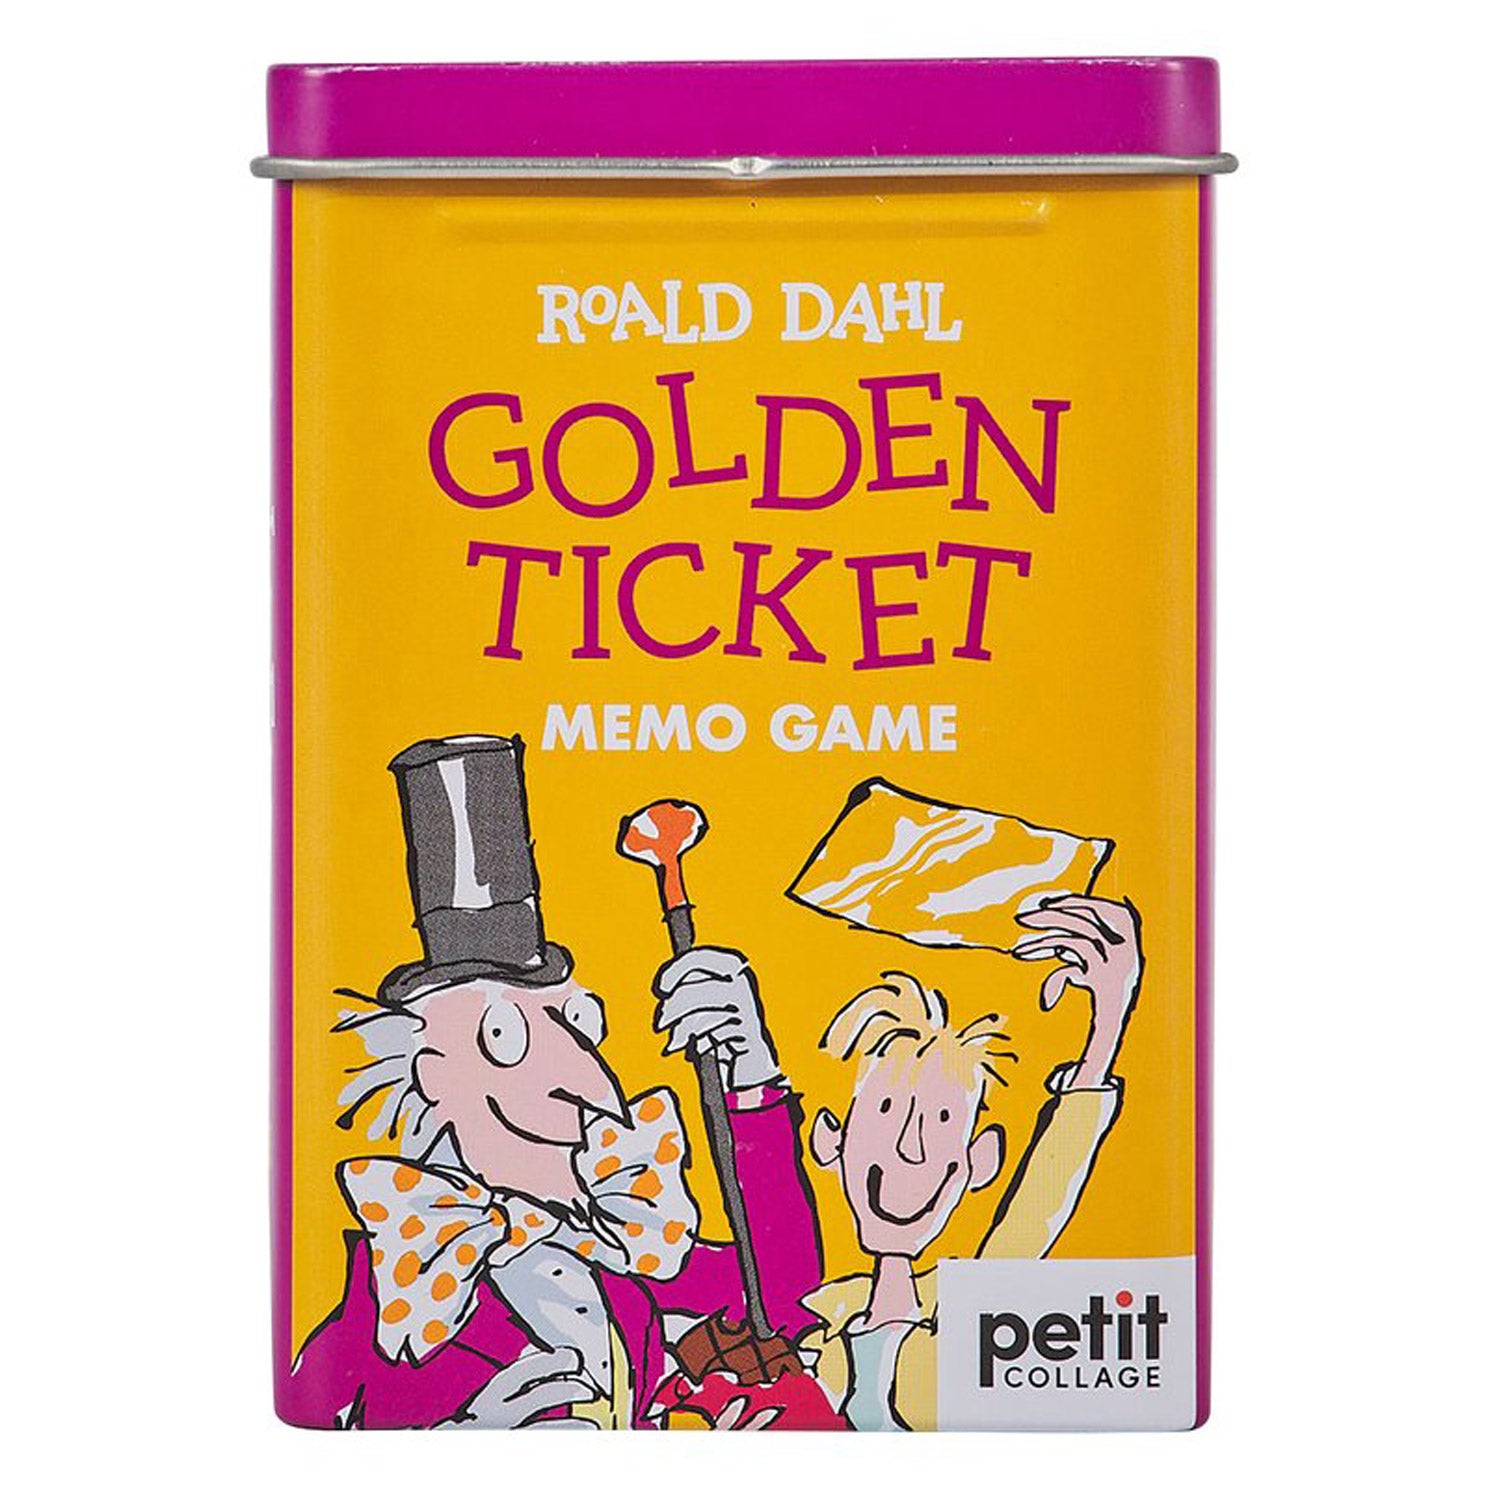 Golden Ticket Memo Game based on Charleie and the Chocolate Factory by Roald Dahl